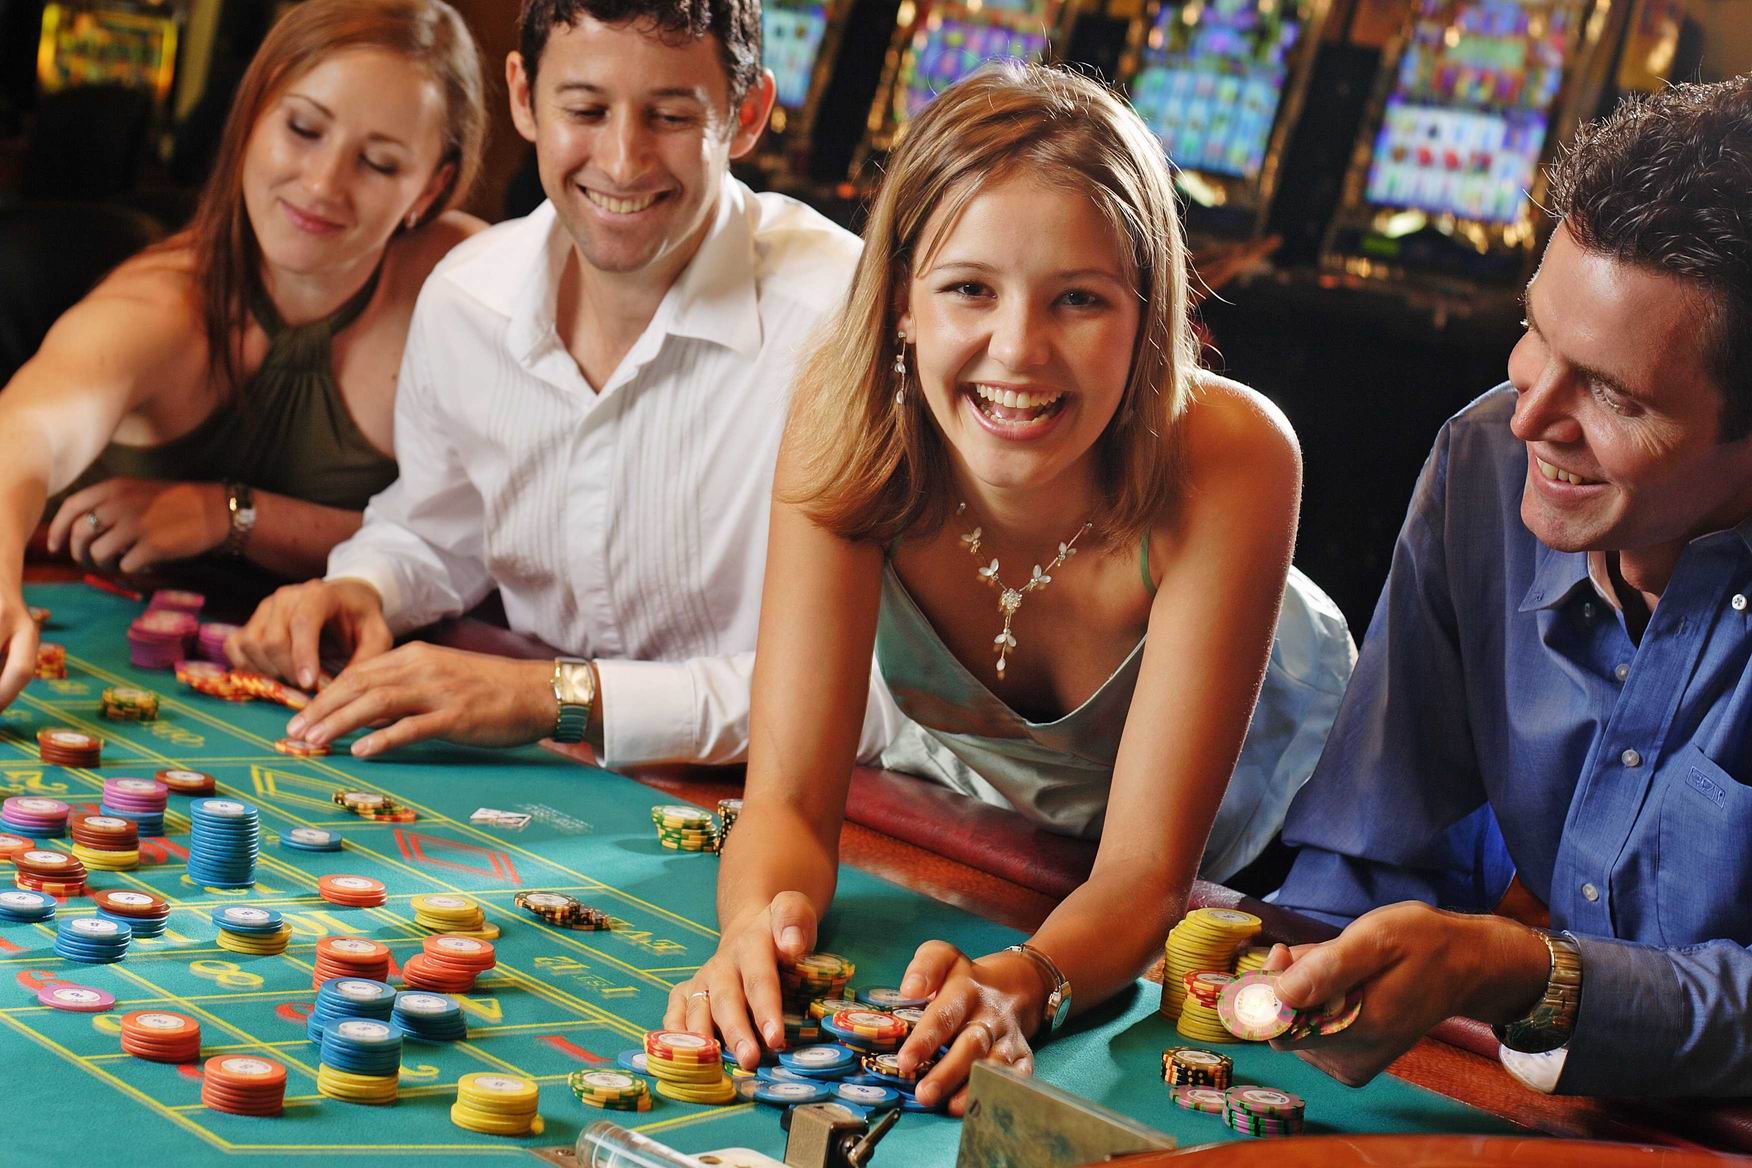 UK Gambling Now Reaches Almost 50 Percent of the Population